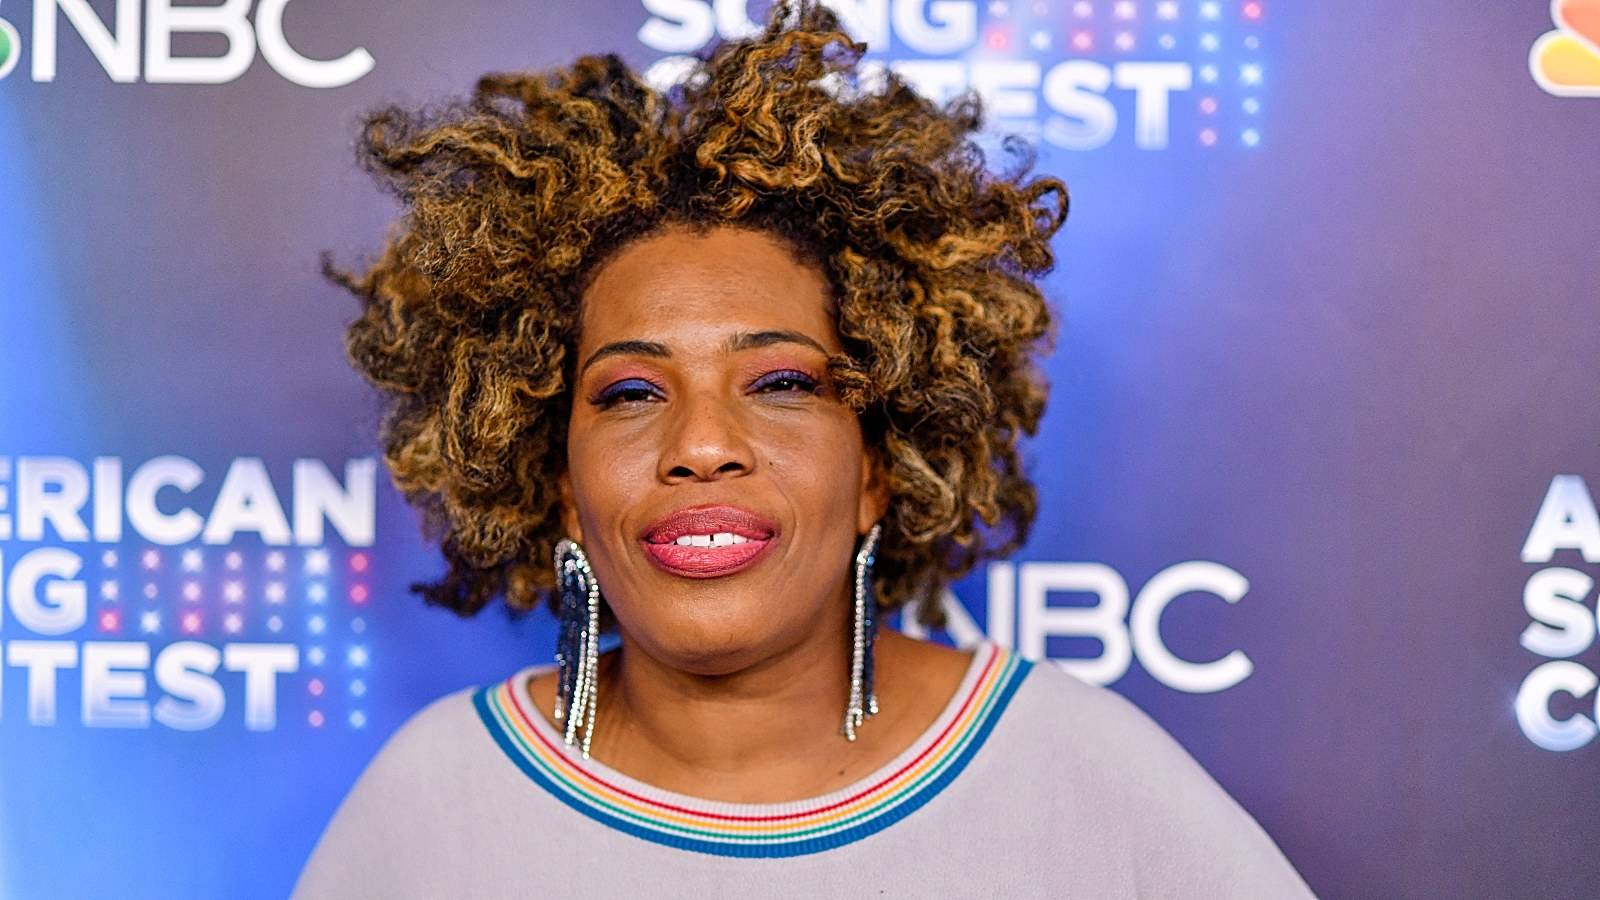 Macy Gray arrives at NBC's 'American Song Contest' Week 2 Red Carpet at Universal Studios Hollywood on March 28, 2022 in Universal City, California.  